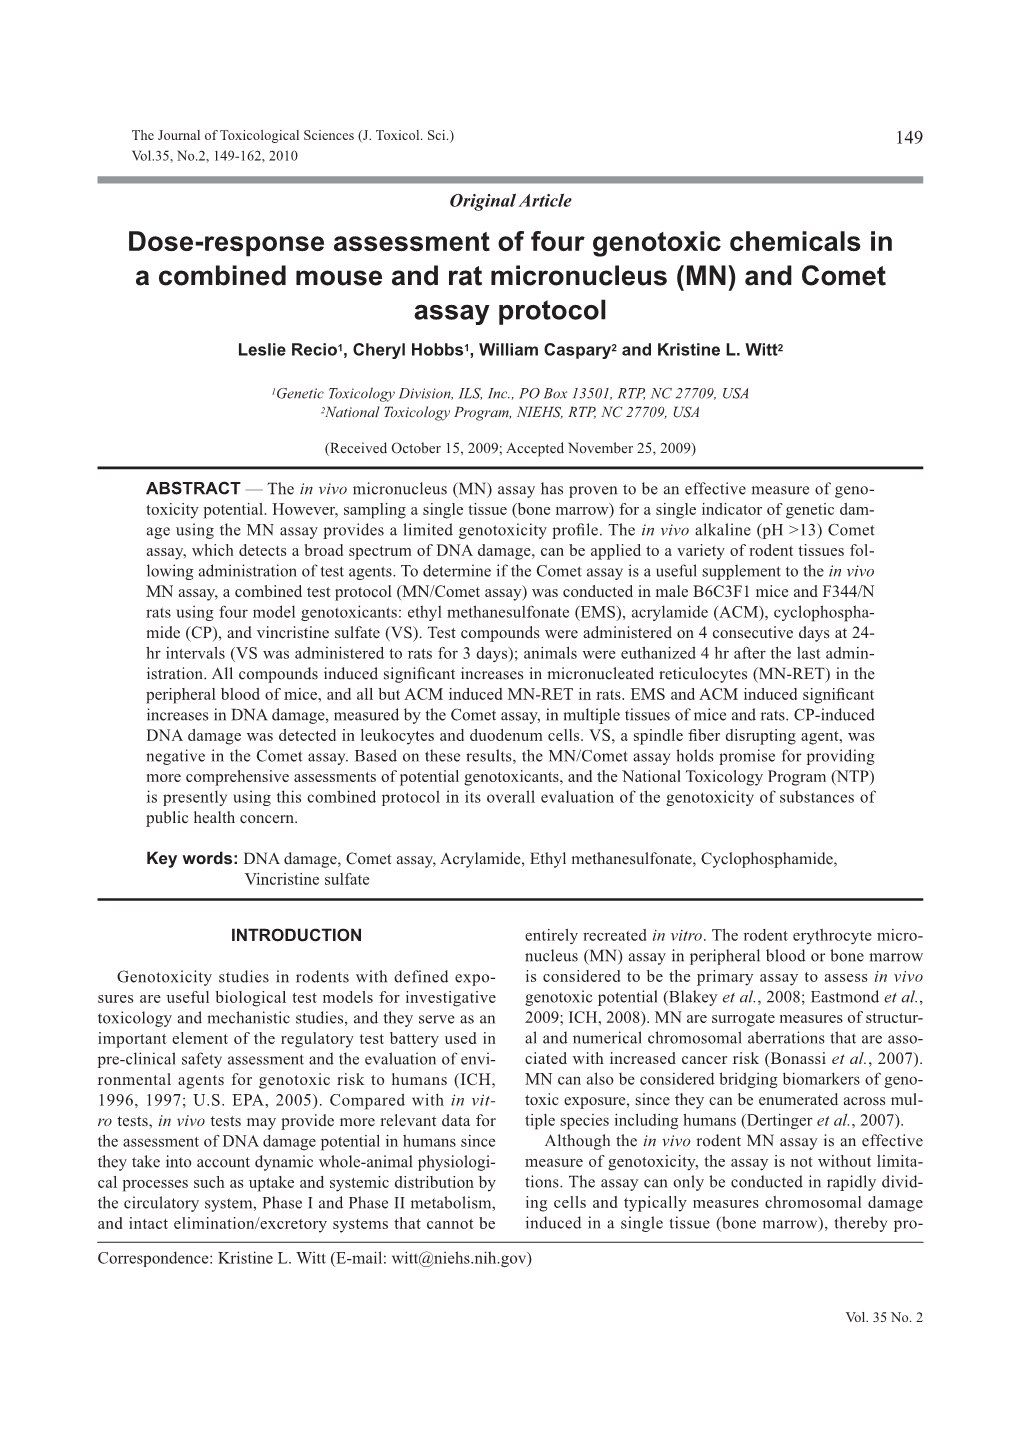 Dose-Response Assessment of Four Genotoxic Chemicals in a Combined Mouse and Rat Micronucleus (MN) and Comet Assay Protocol